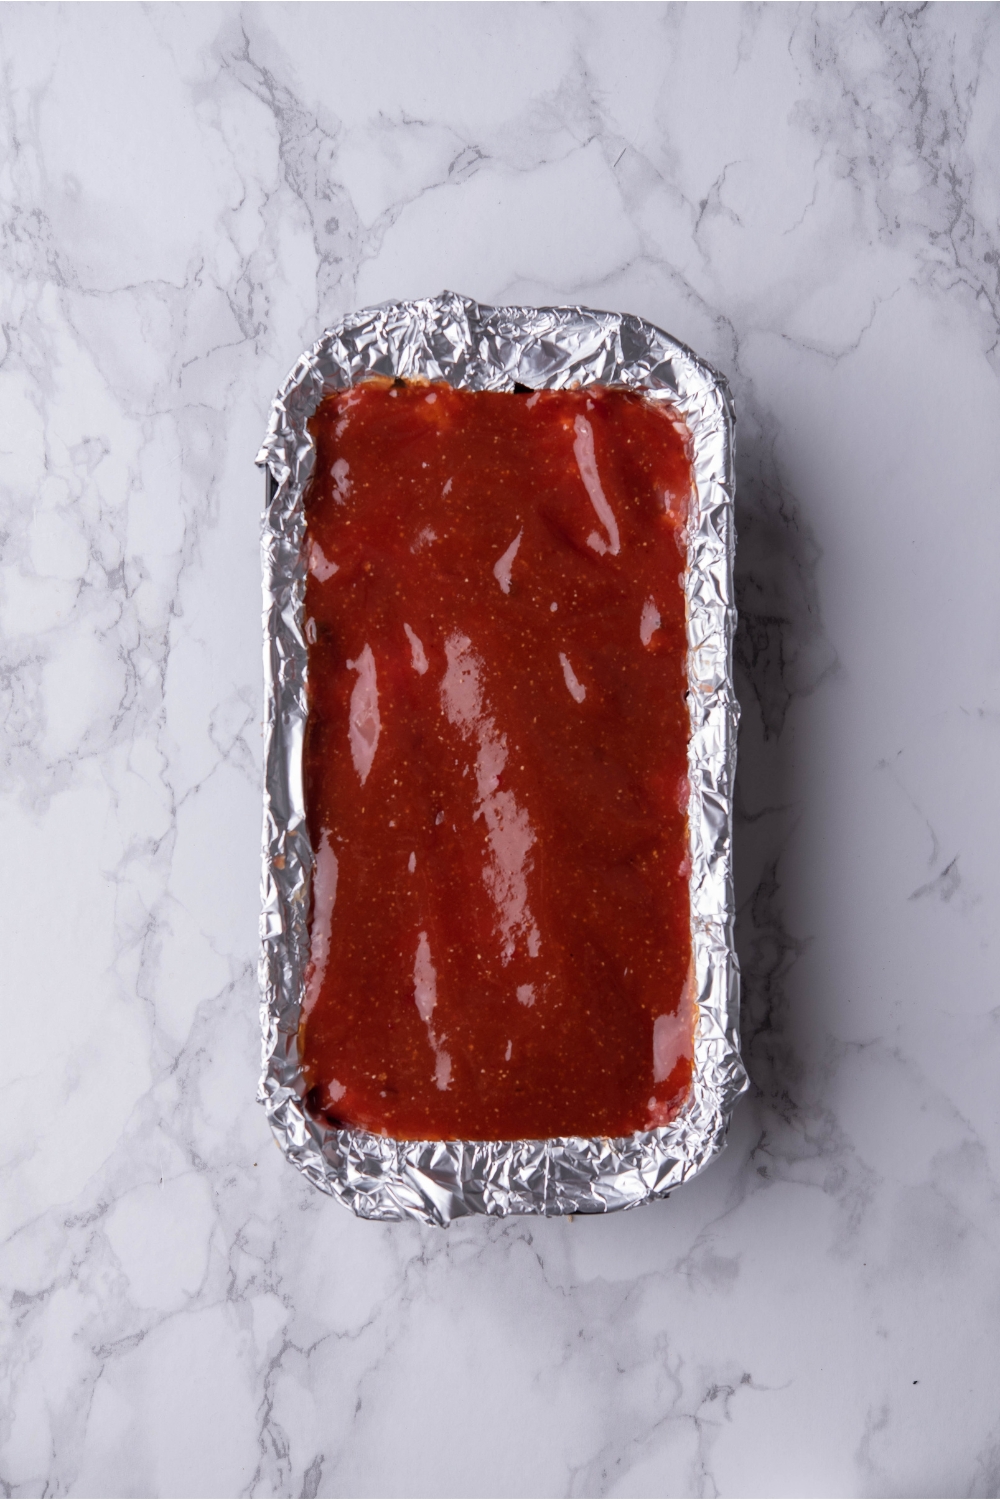 Loaf pan lined with aluminum foil filled with unbaked meatloaf covered in a ketchup glaze.